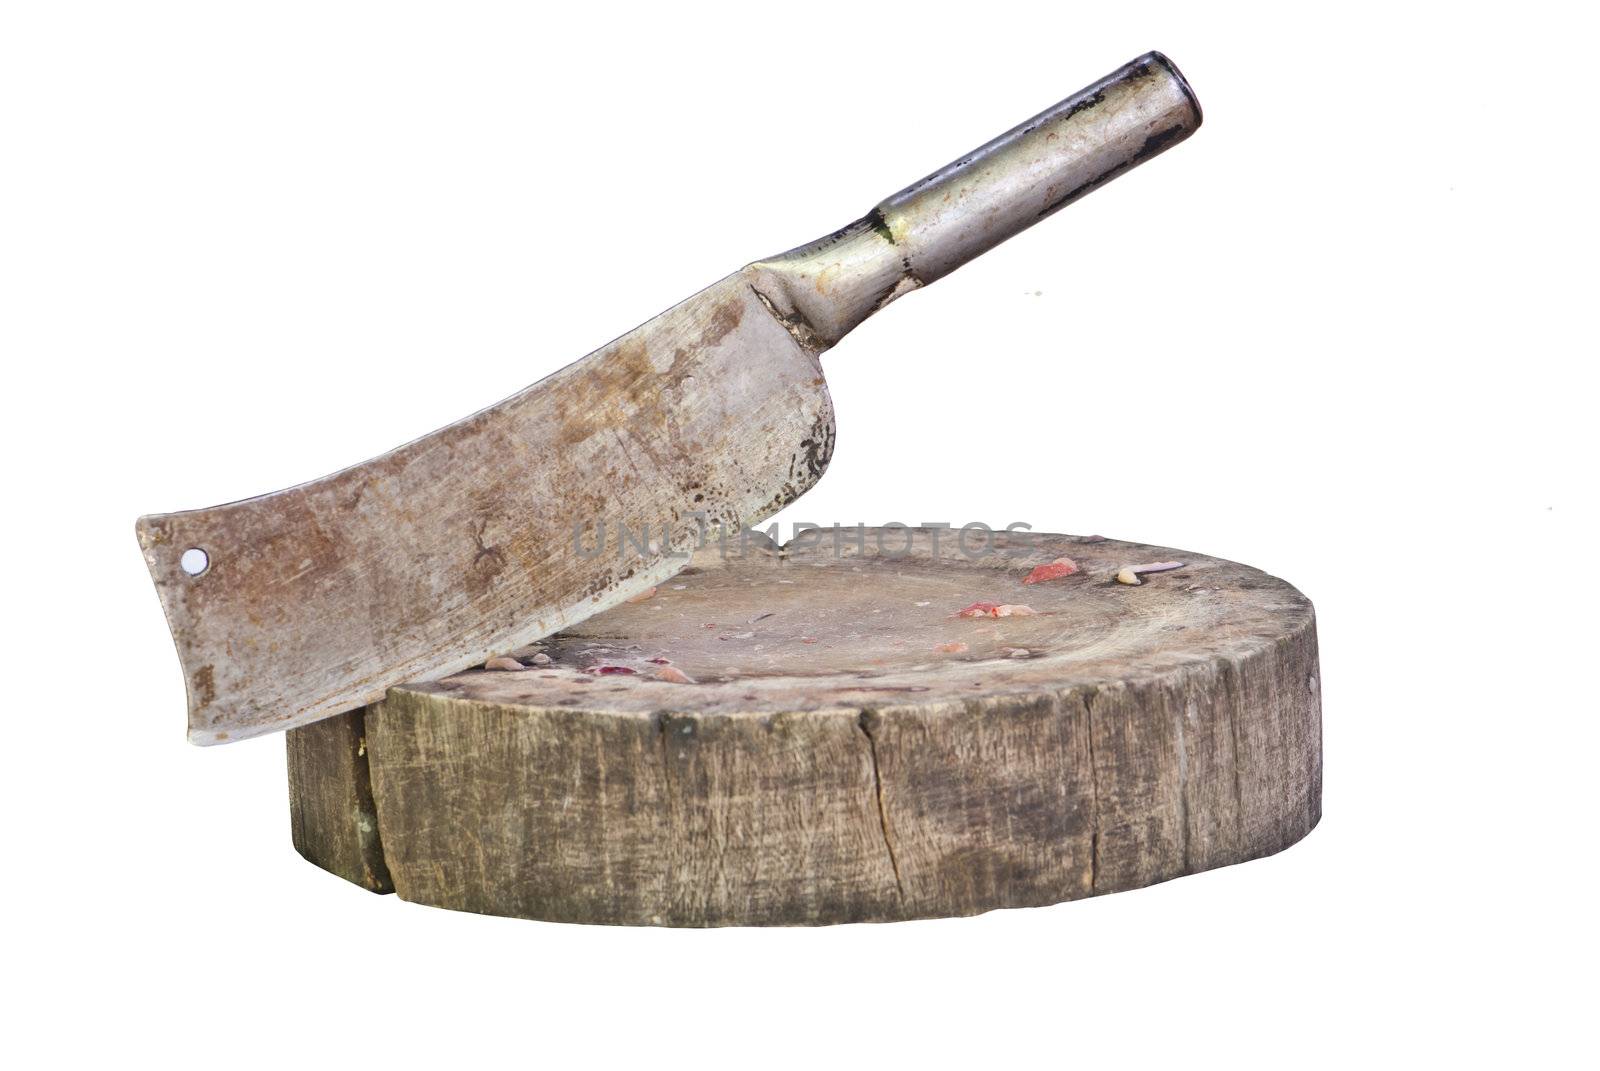 Meat Cleaver Stuck In Wood by sasilsolutions